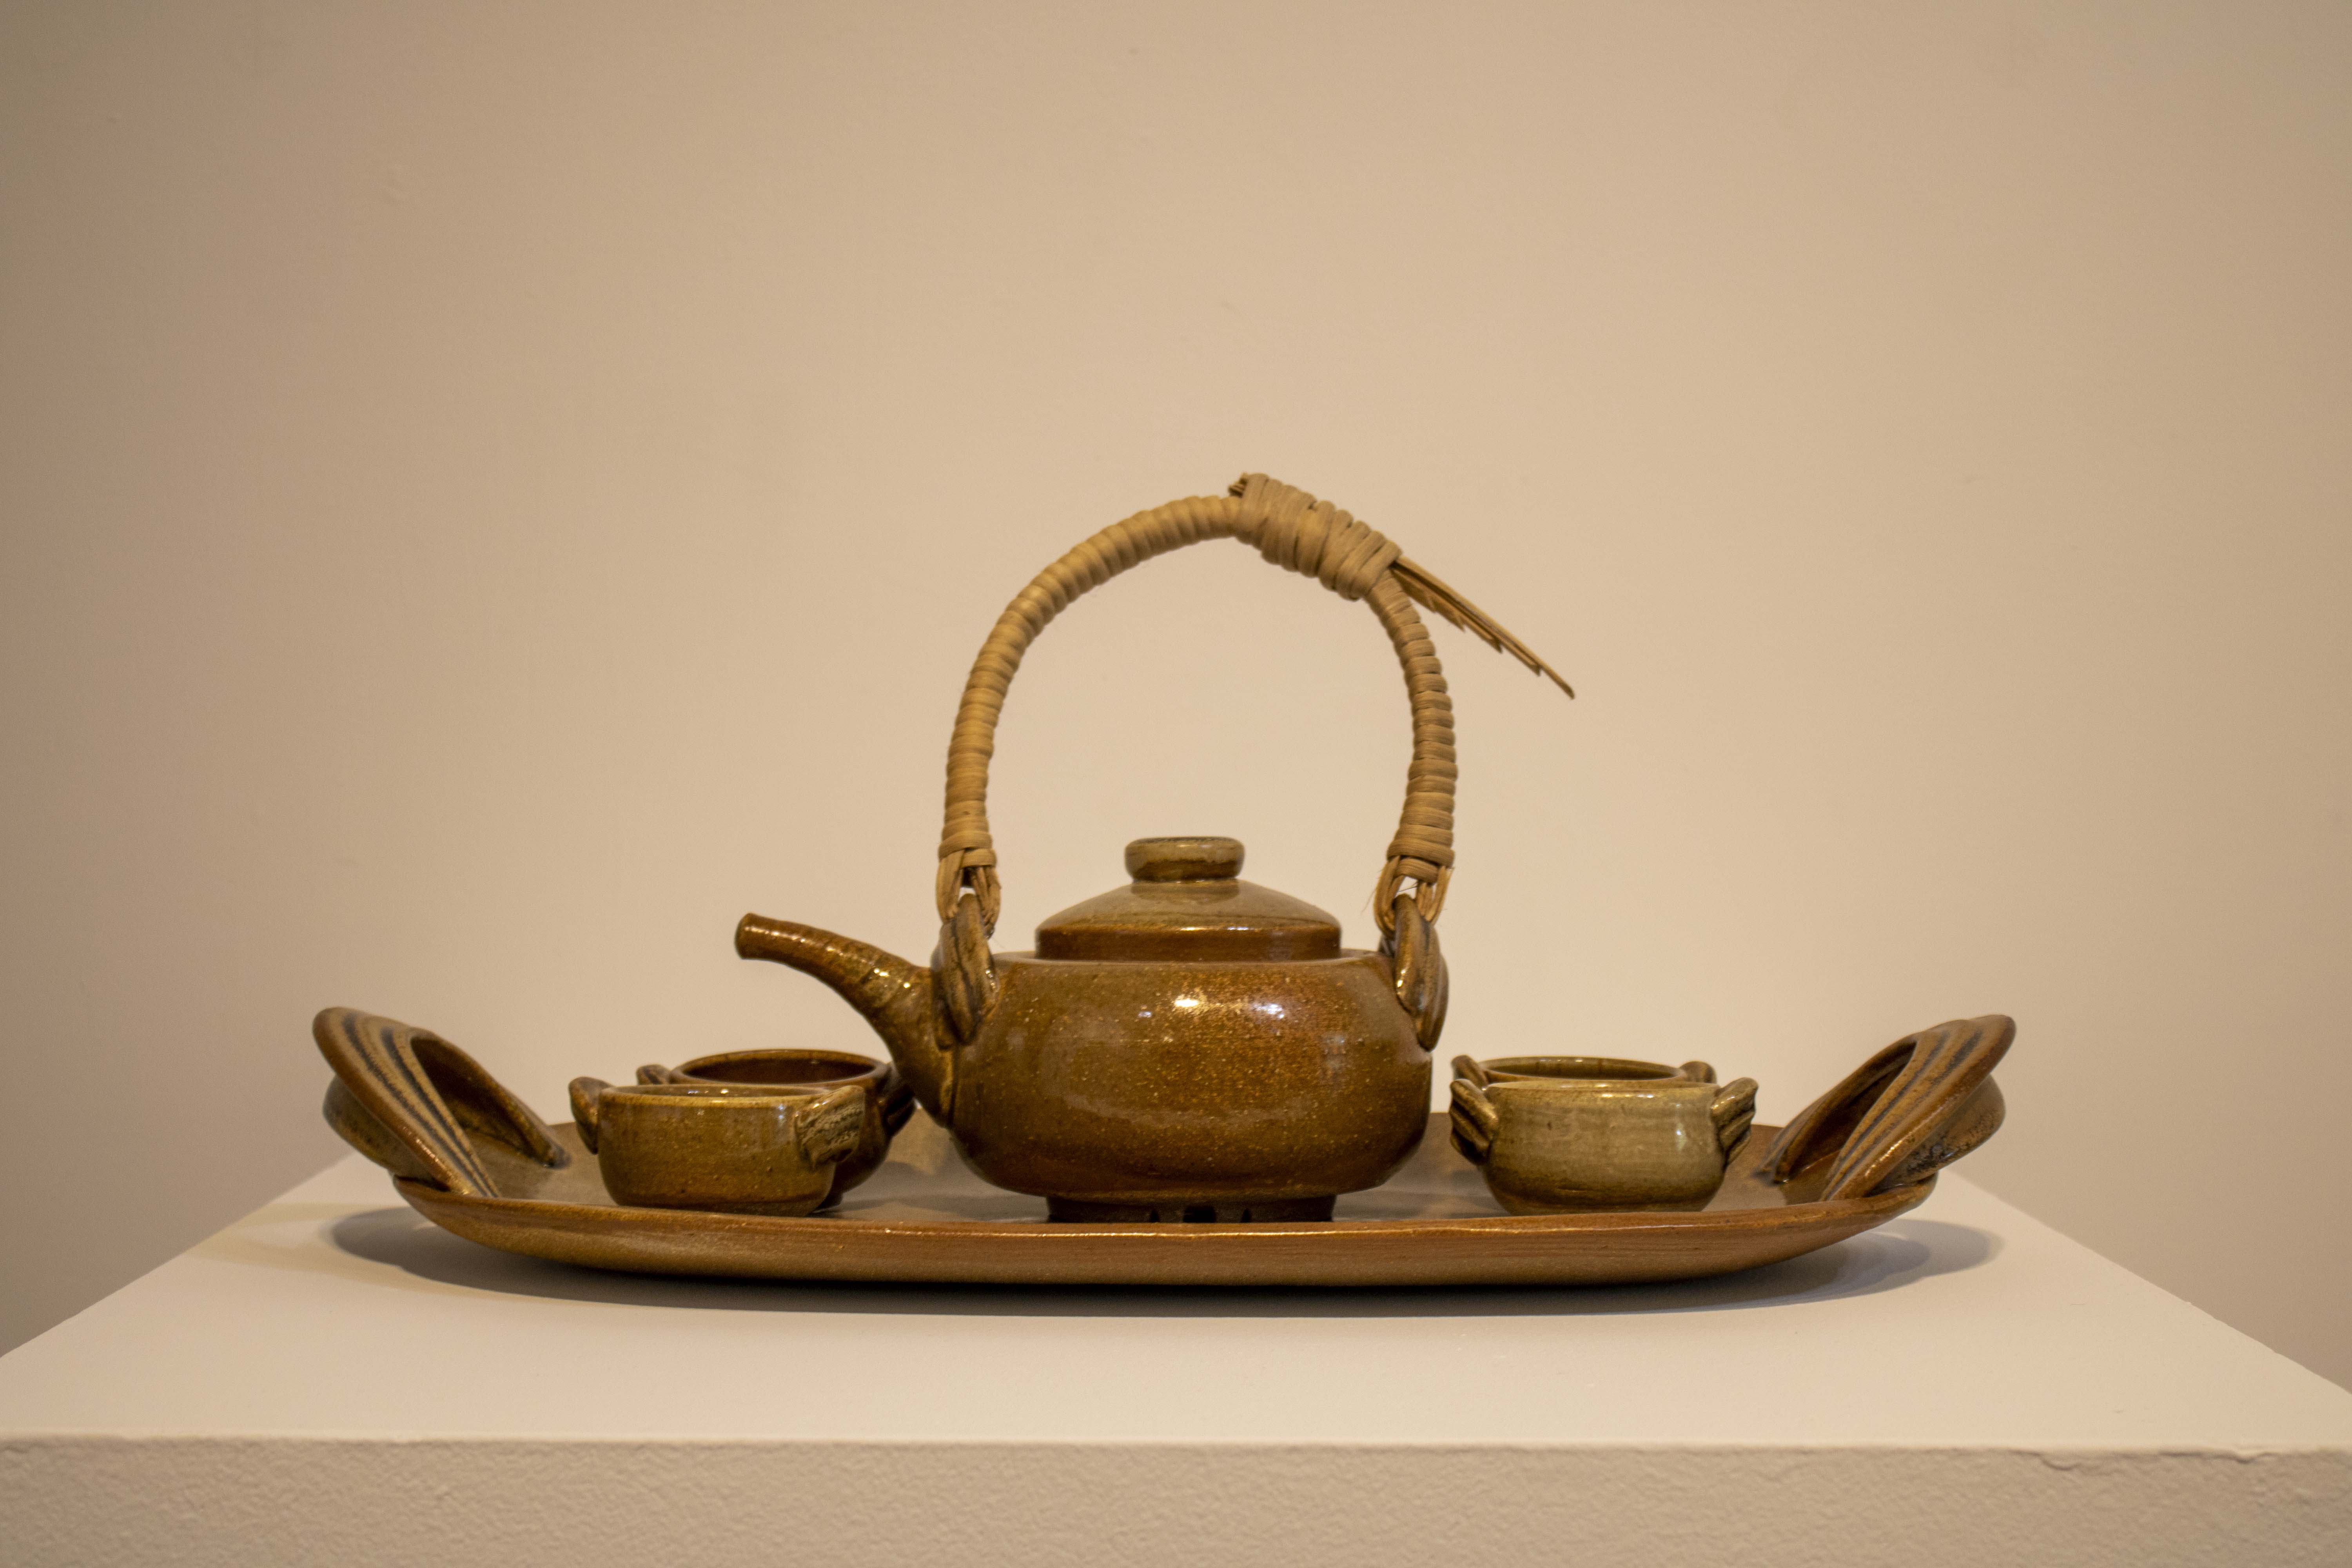 Ceramic platter with teapot and 4 cups. Teapot uses woven reeds as a handle.